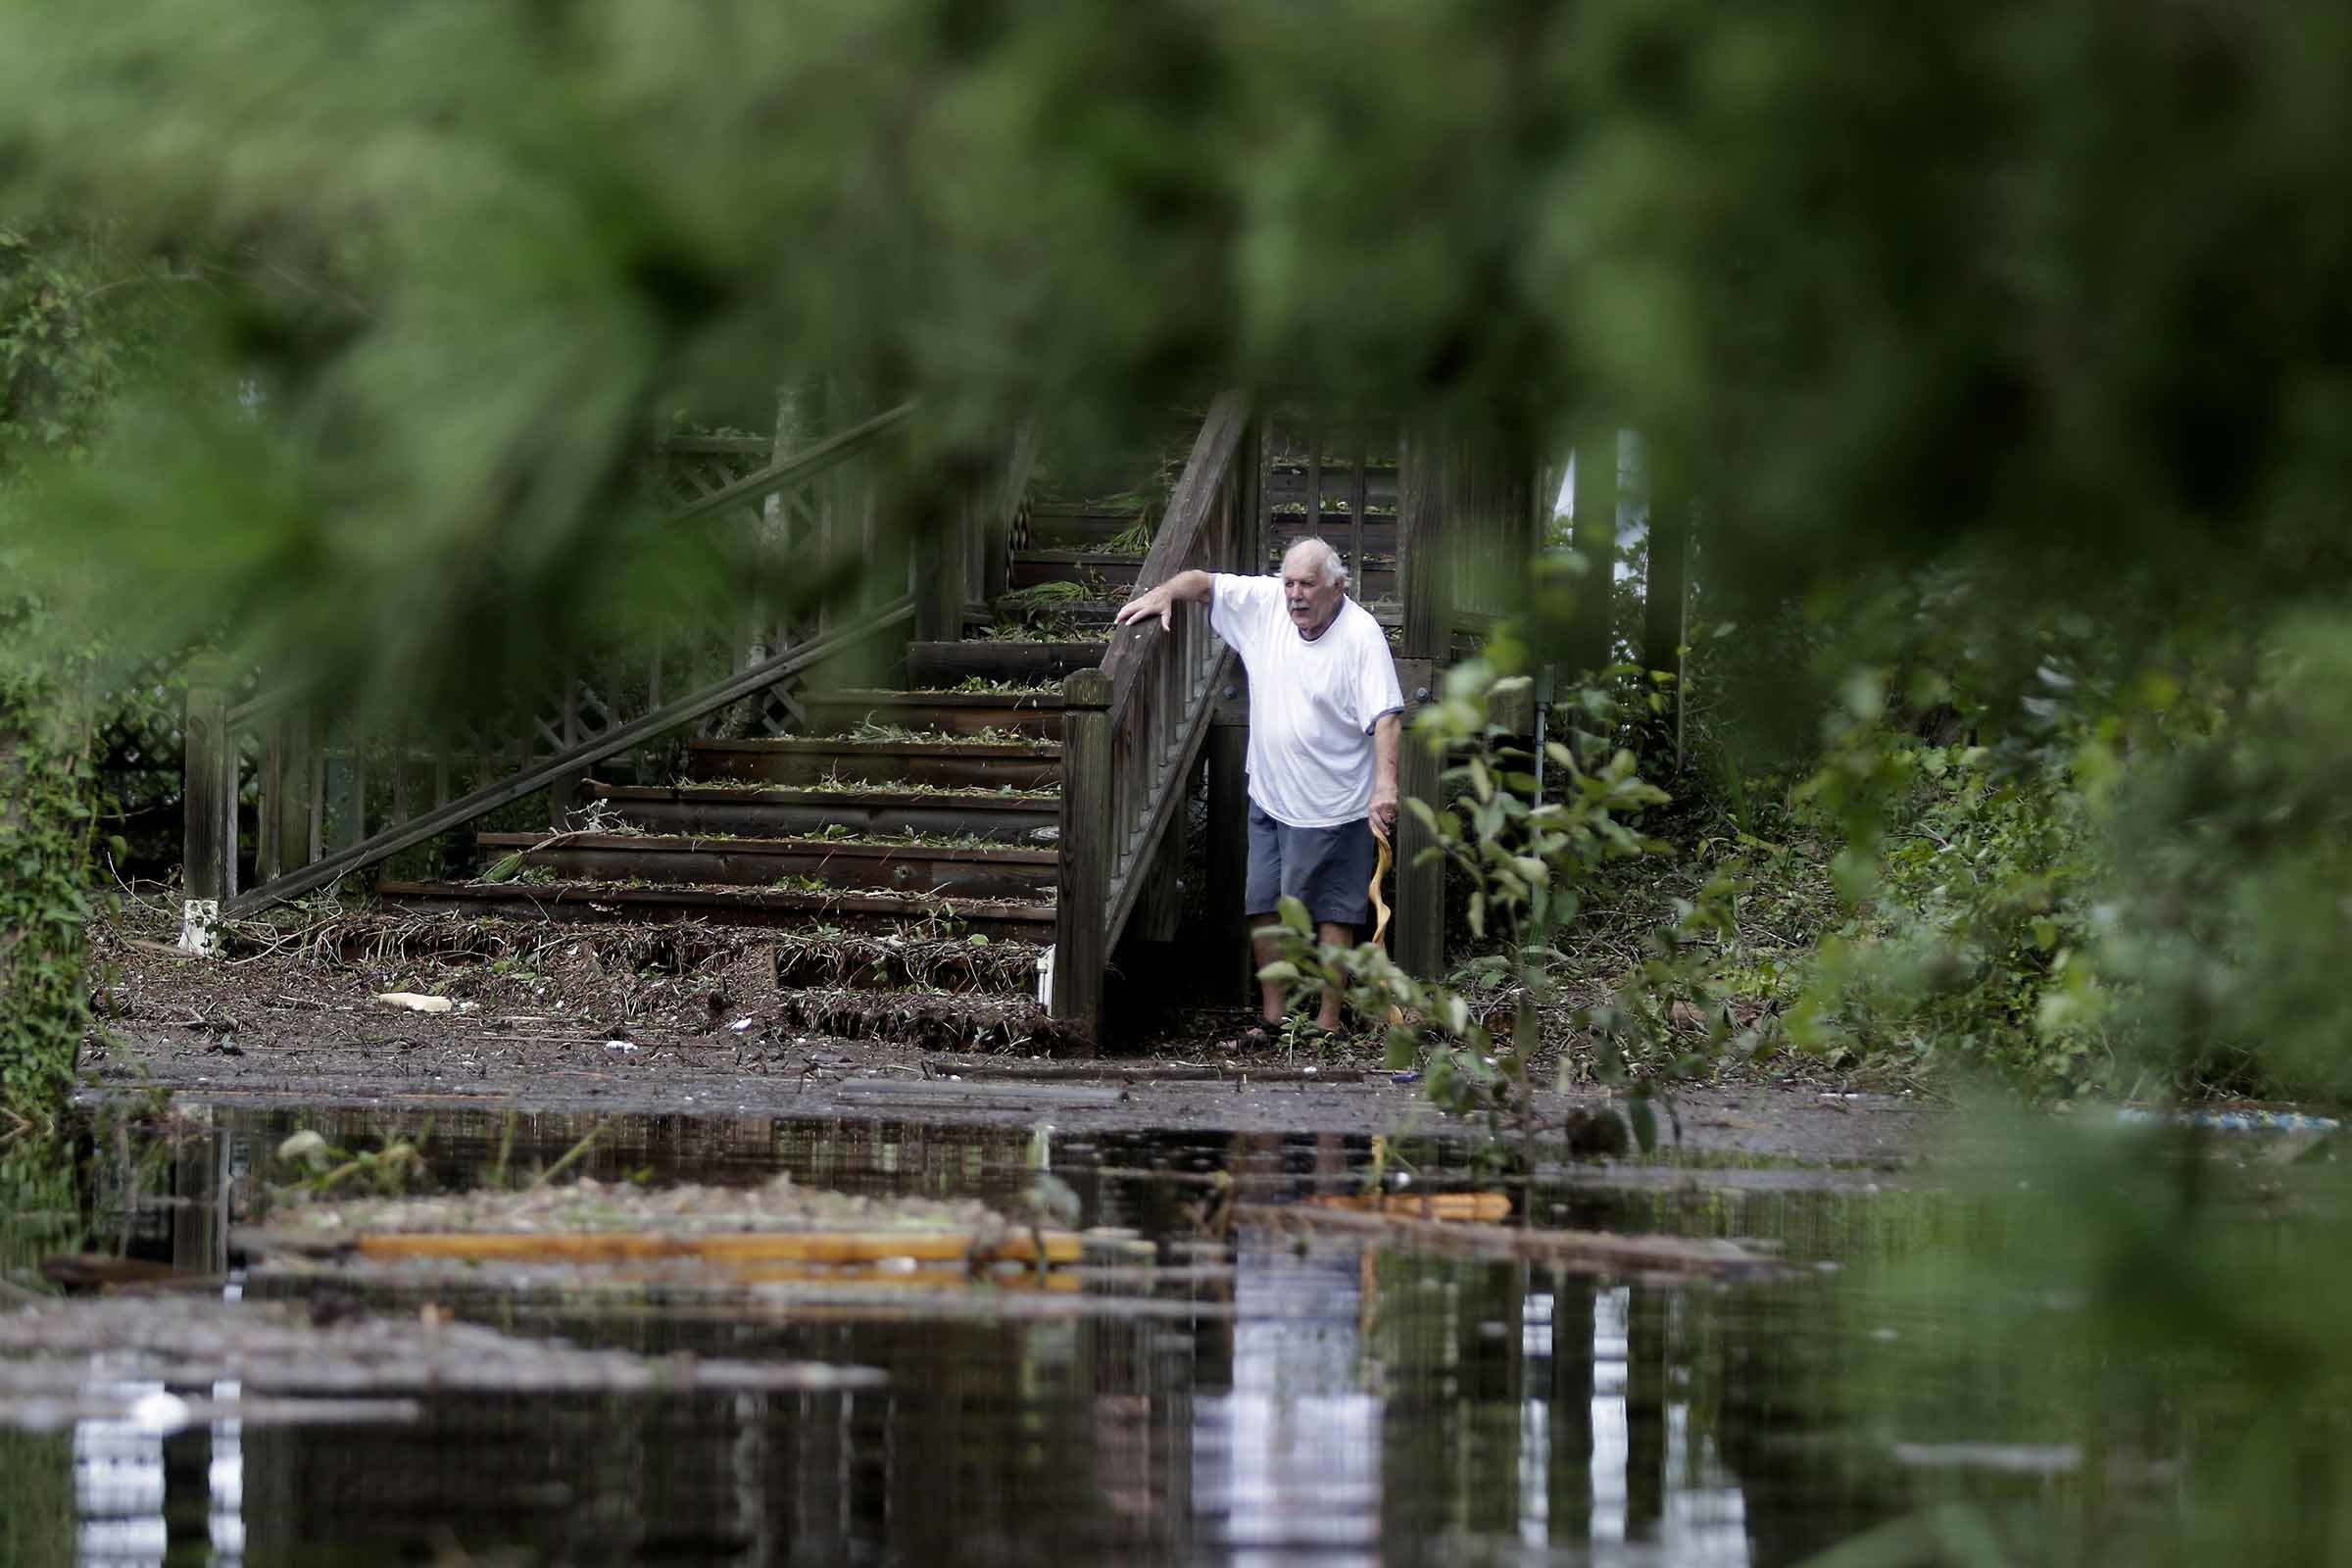 PHOTO: Elton Matheson, who rode out the storm, looks at the flooded waters in front of his home after Hurricane Florence hit Emerald Isle N.C.,Sunday, Sept. 16, 2018.